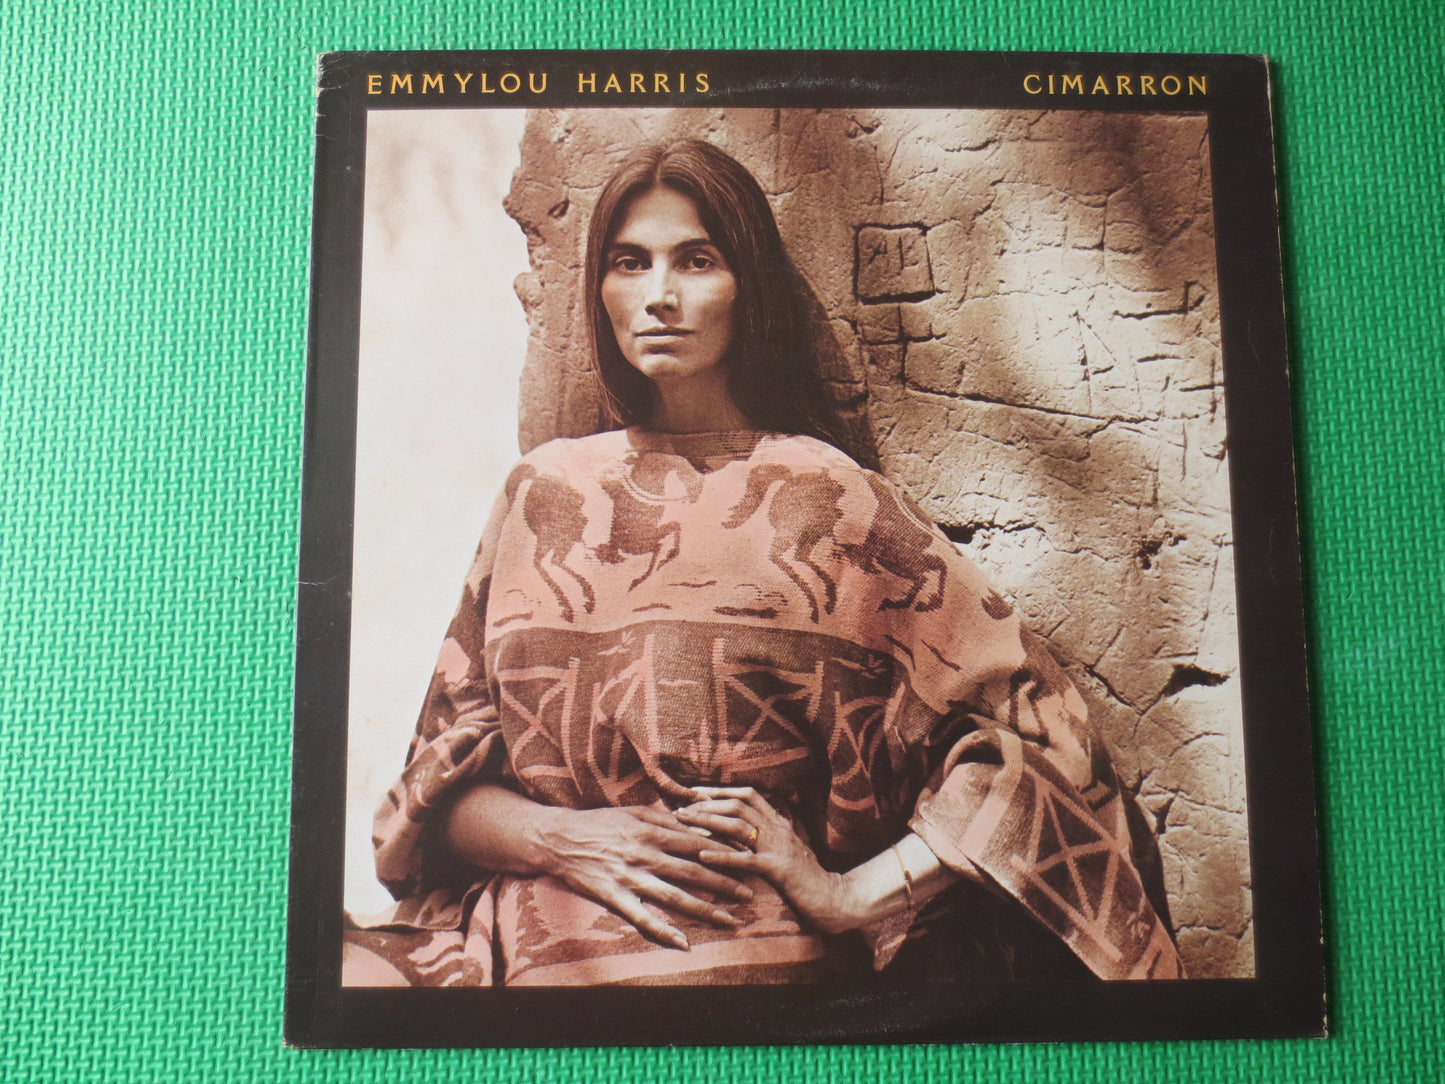 EMMYLOU HARRIS, CIMARRON, Country Records, Vintage Vinyl, Record Vinyl, Records, Vinyl Records, Vinyl Album, 1981 Records